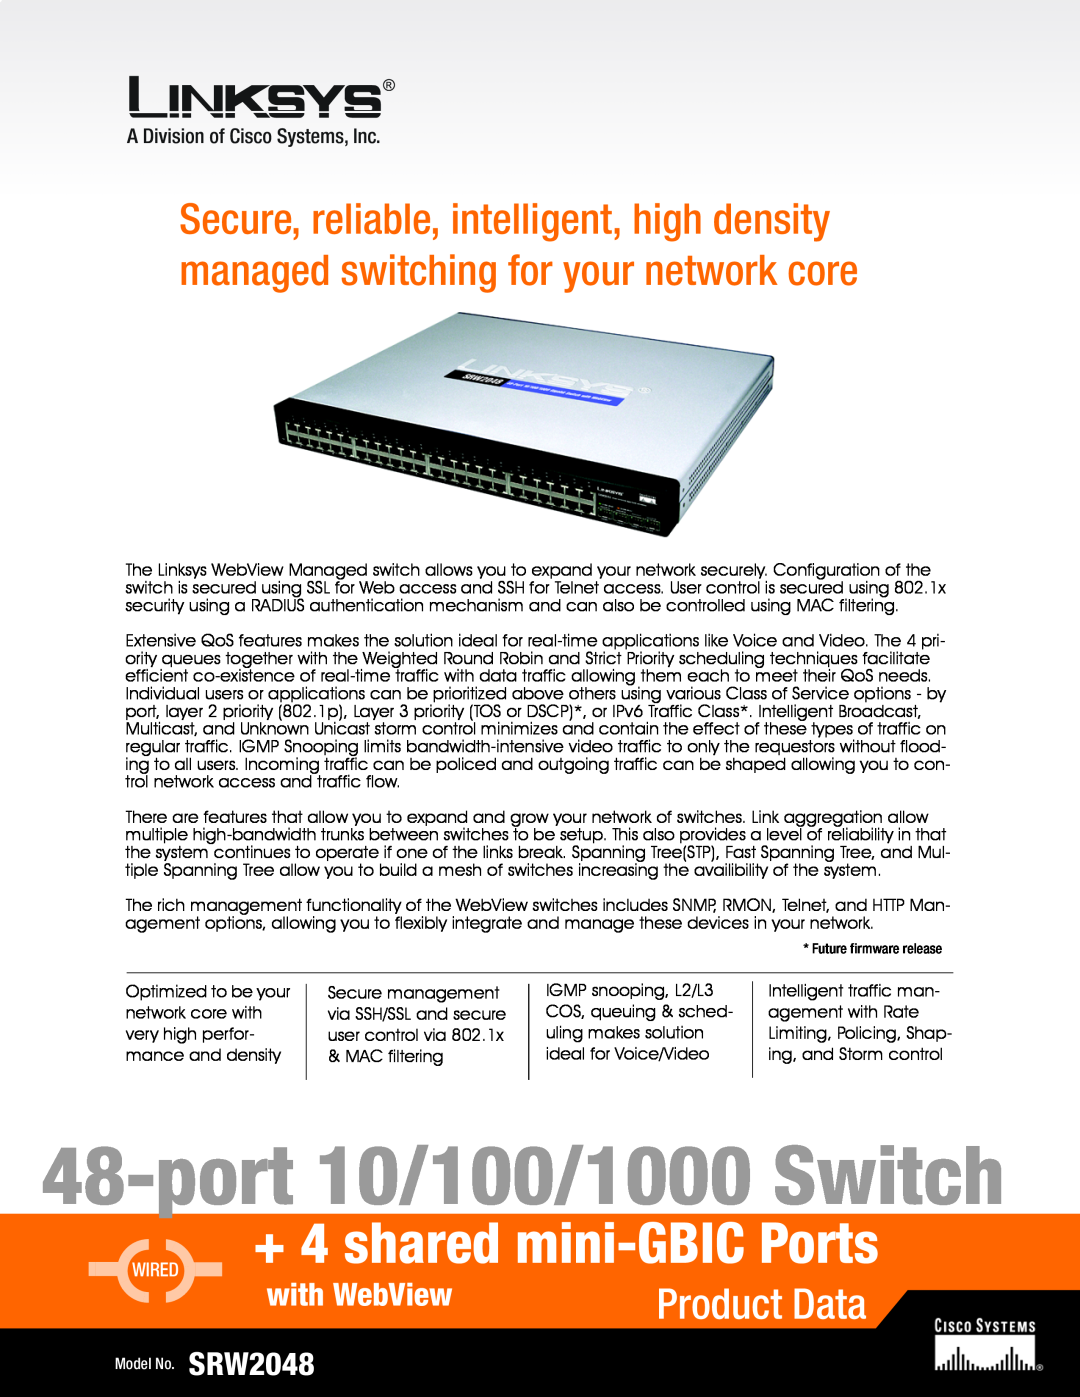 Linksys SRW2048 manual port 10/100/1000 Switch, + 4 shared mini-GBIC Ports, Product Data, with WebView 